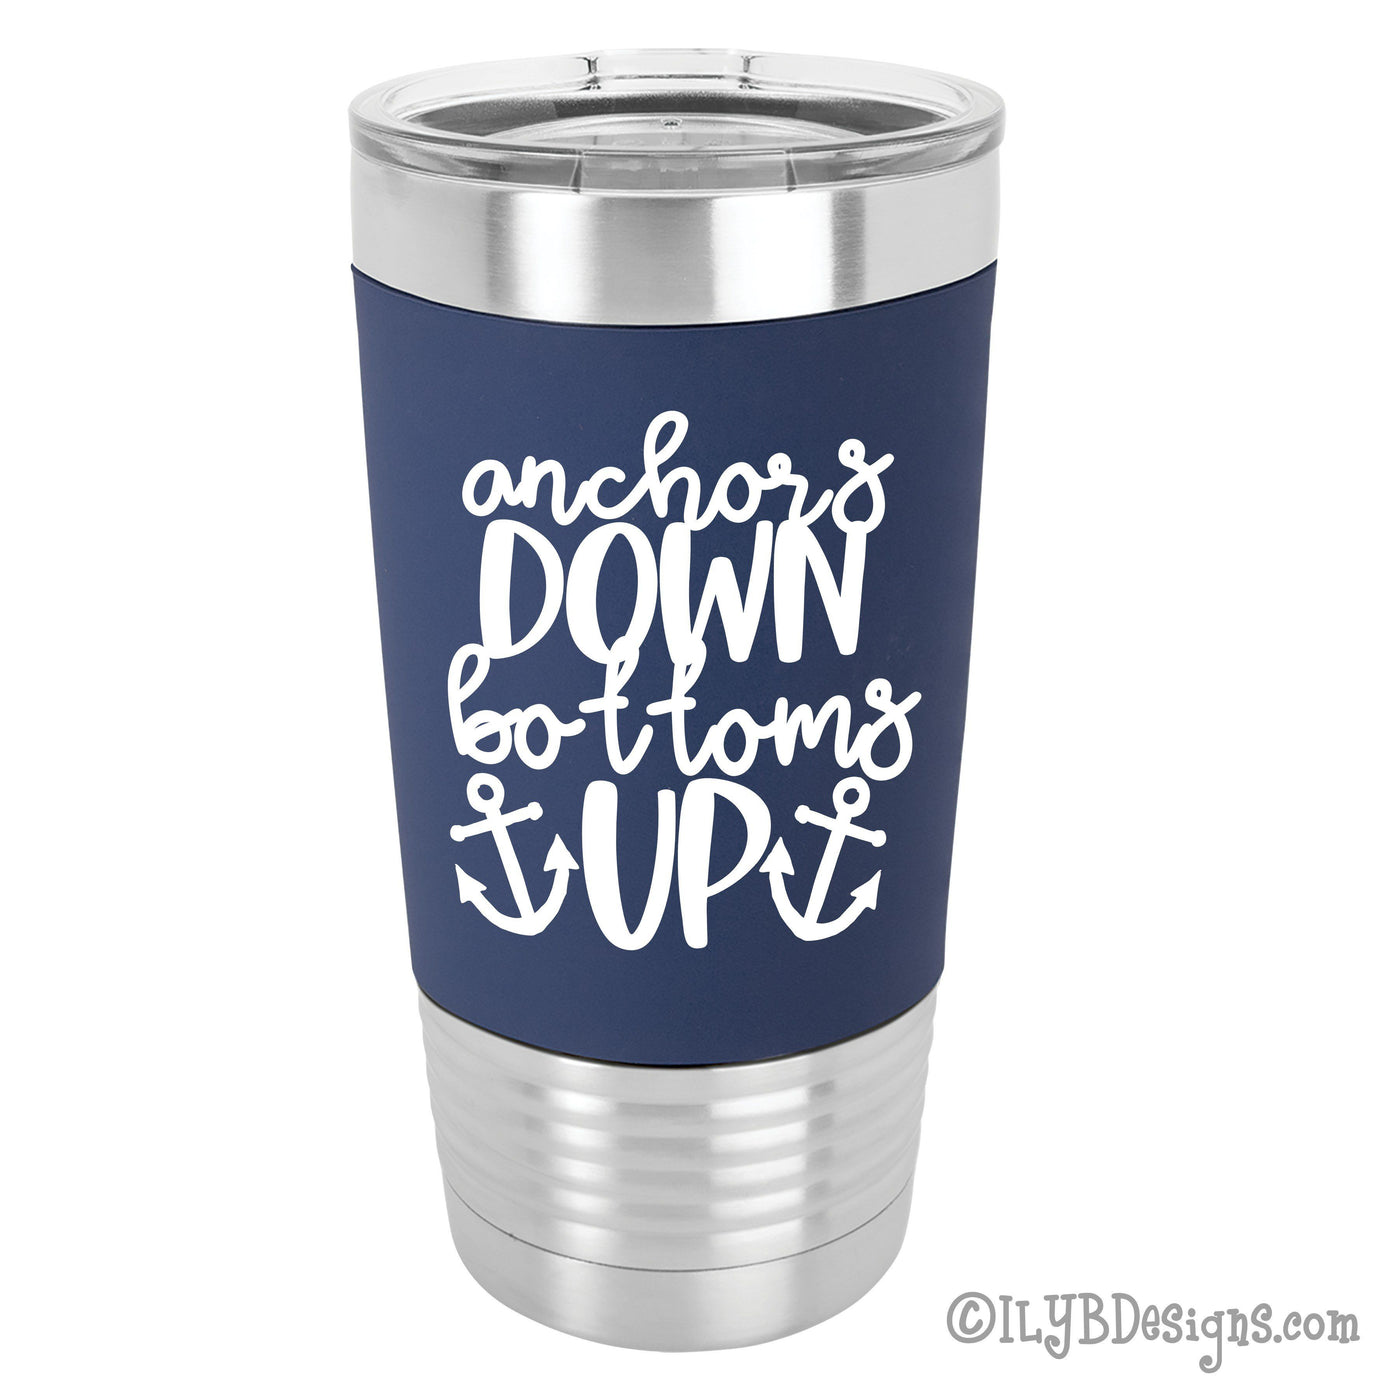 Anchors Down Bottoms Up 20oz Polar Camel Stainless Steel Tumbler with navy blue silicone sleeve. The words "anchors down bottoms up" is laser engraved in white along with 2 engraved anchors along each side of words.